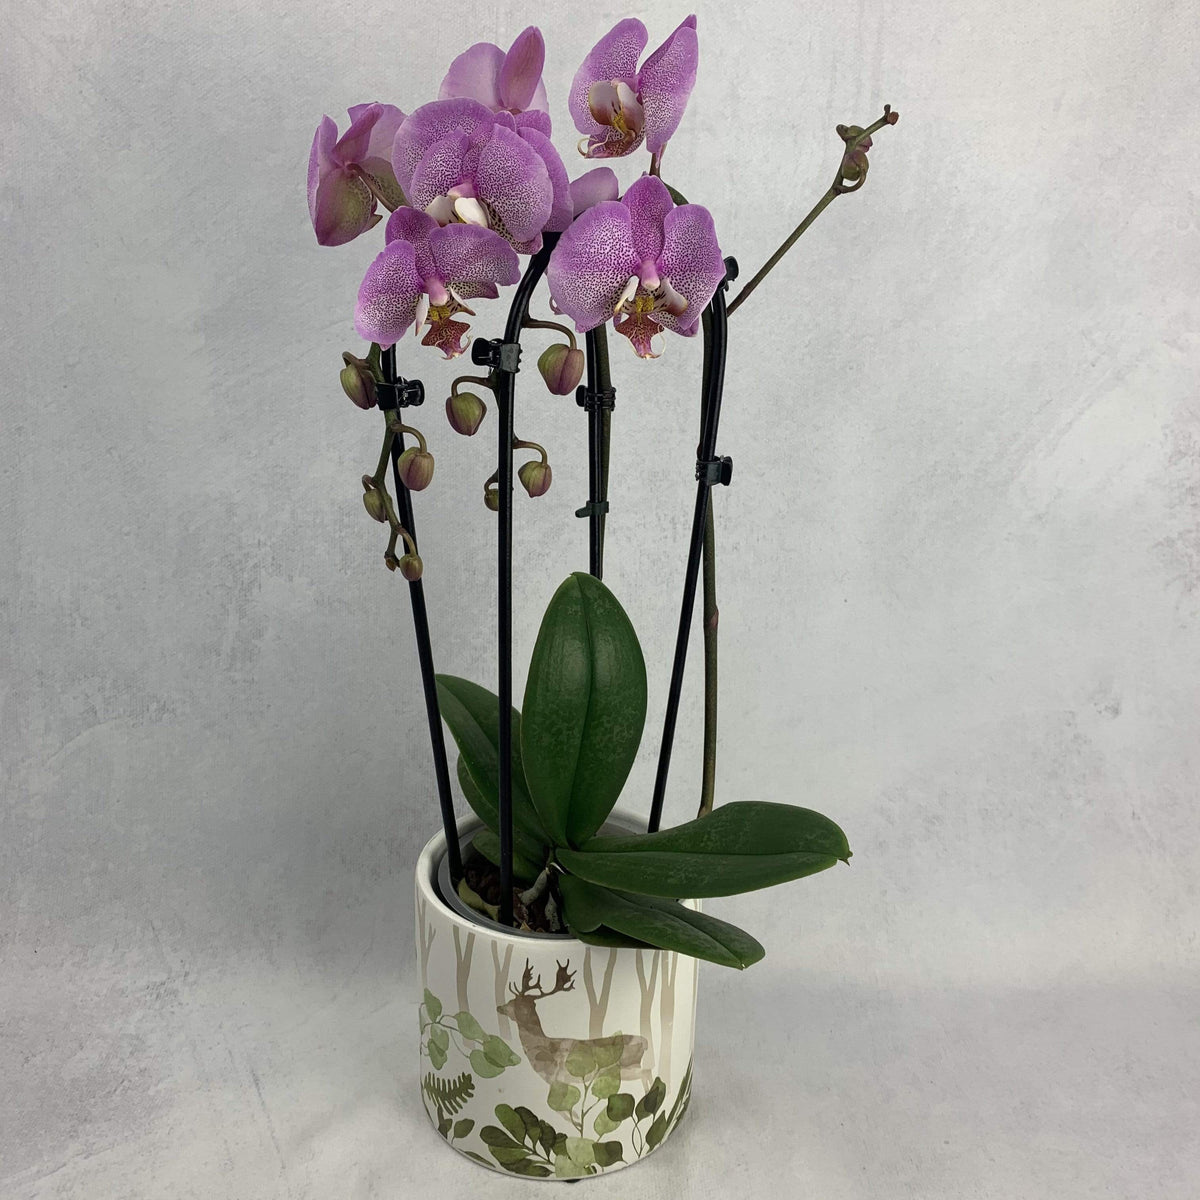 Phalaenopsis orchid 2 arched branches Pink / White 48 cm